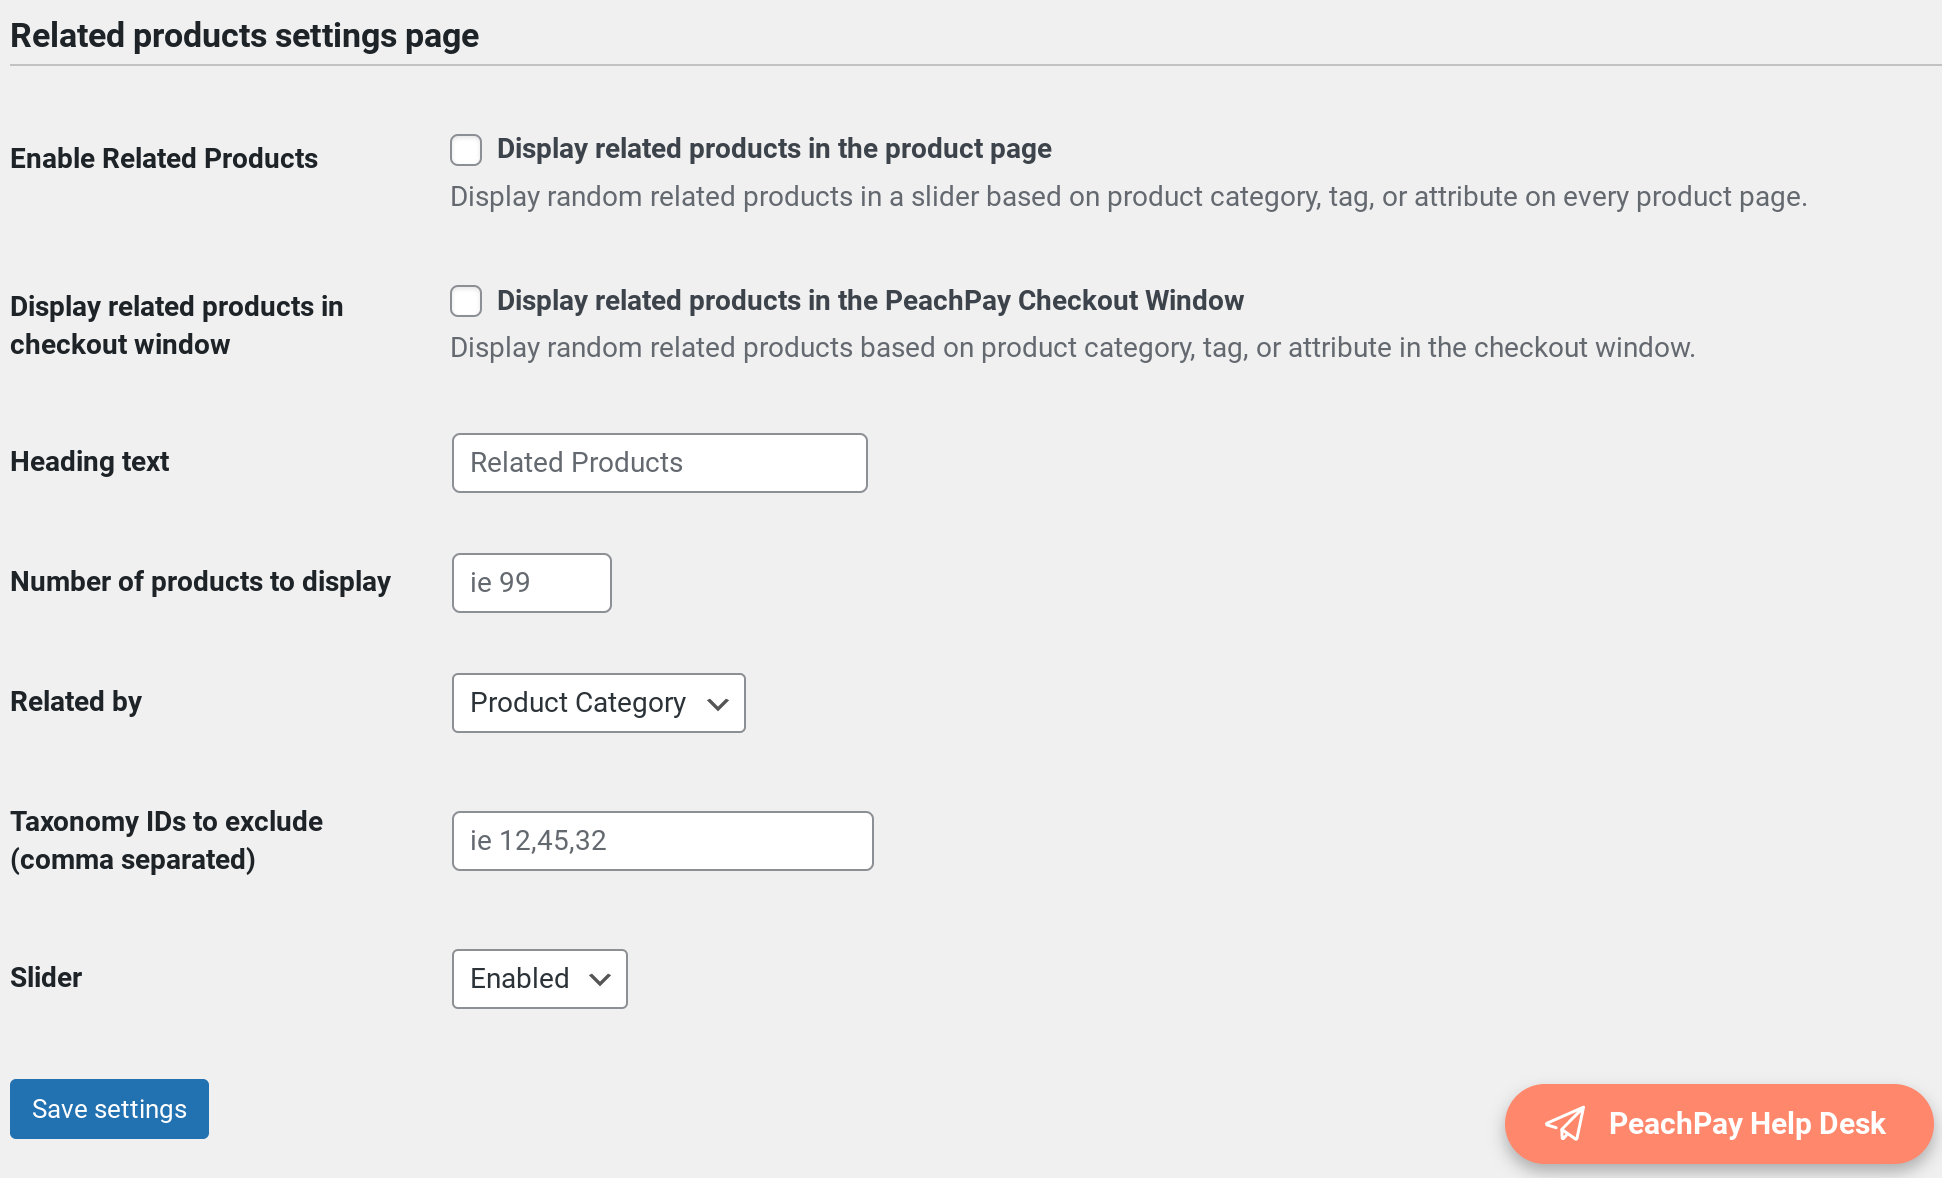 PeachPay's settings for showing related products during checkout